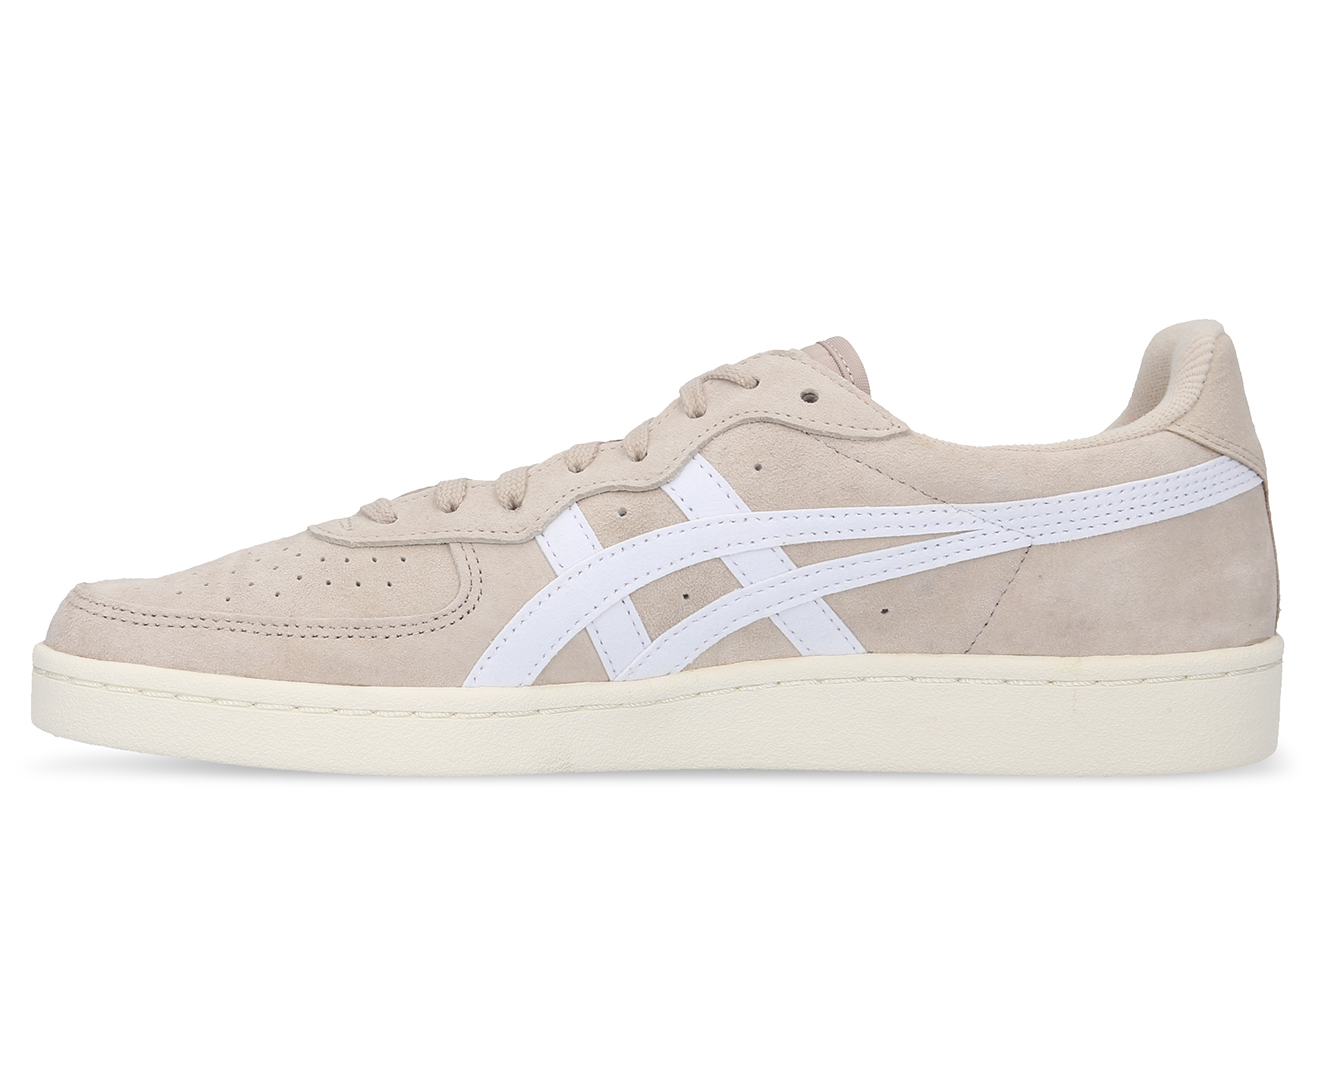 Onitsuka Tiger Unisex GSM Sneakers - Simply Taupe/White | Catch.co.nz